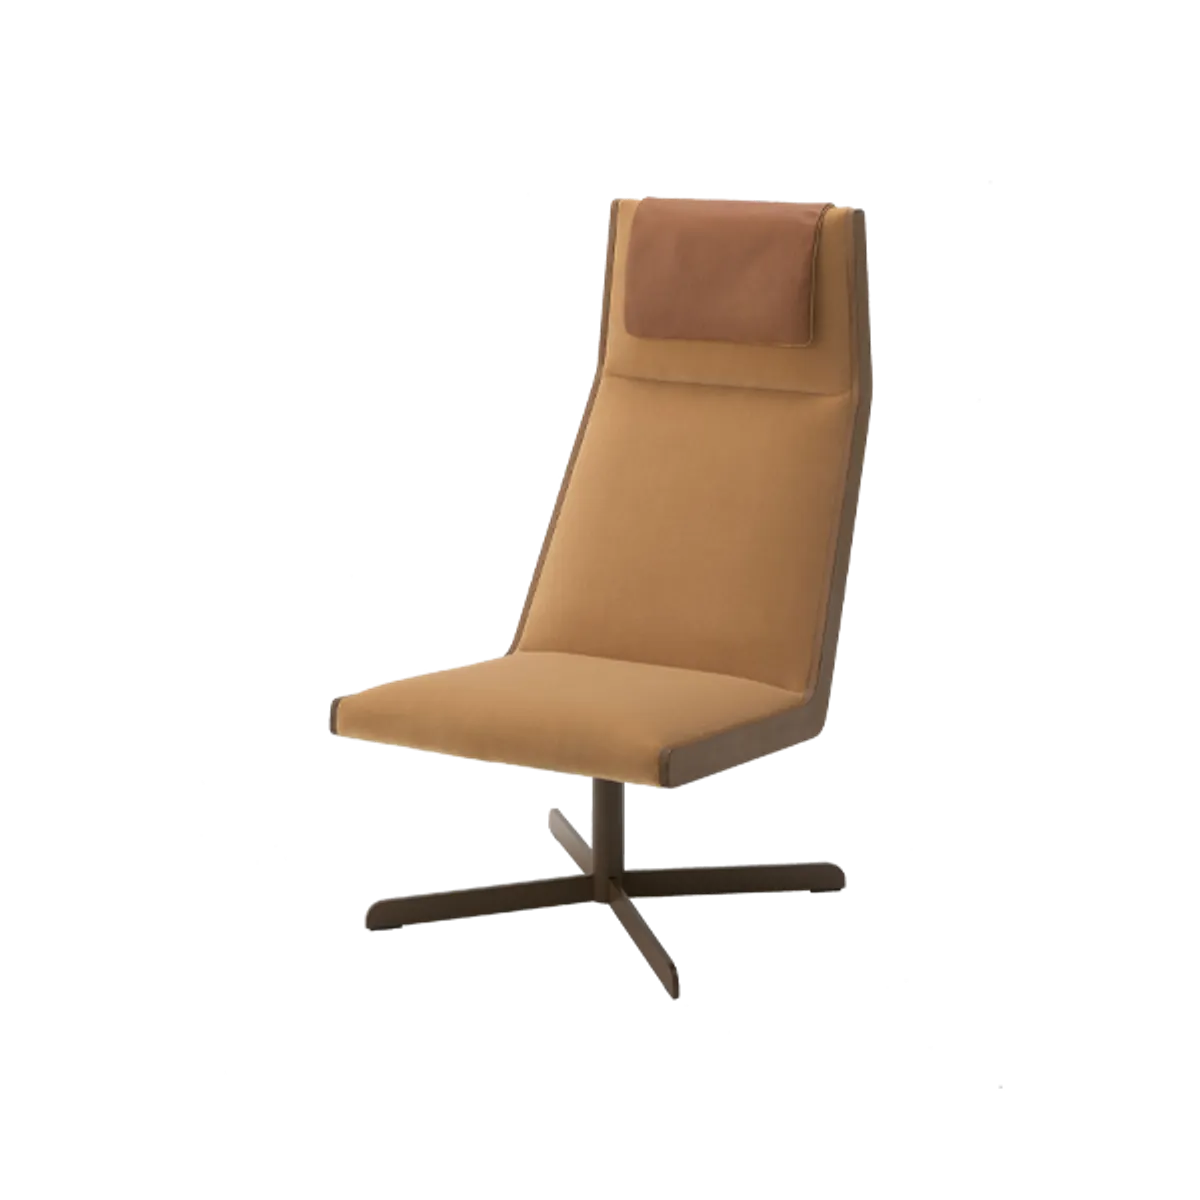 Stilo High Back Swivel Chair Retro Furniture Inside Out Contracts